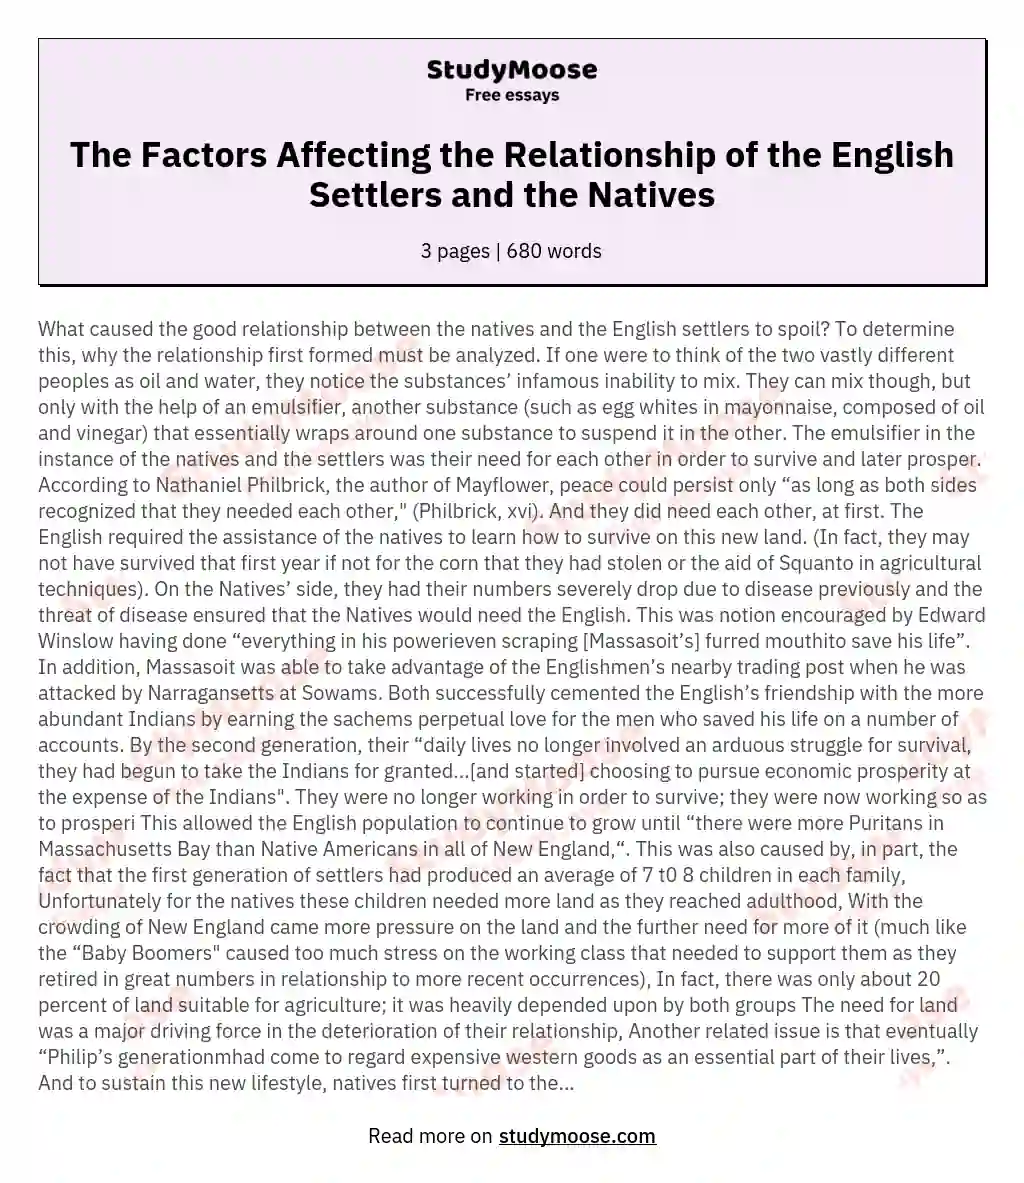 The Factors Affecting the Relationship of the English Settlers and the Natives essay